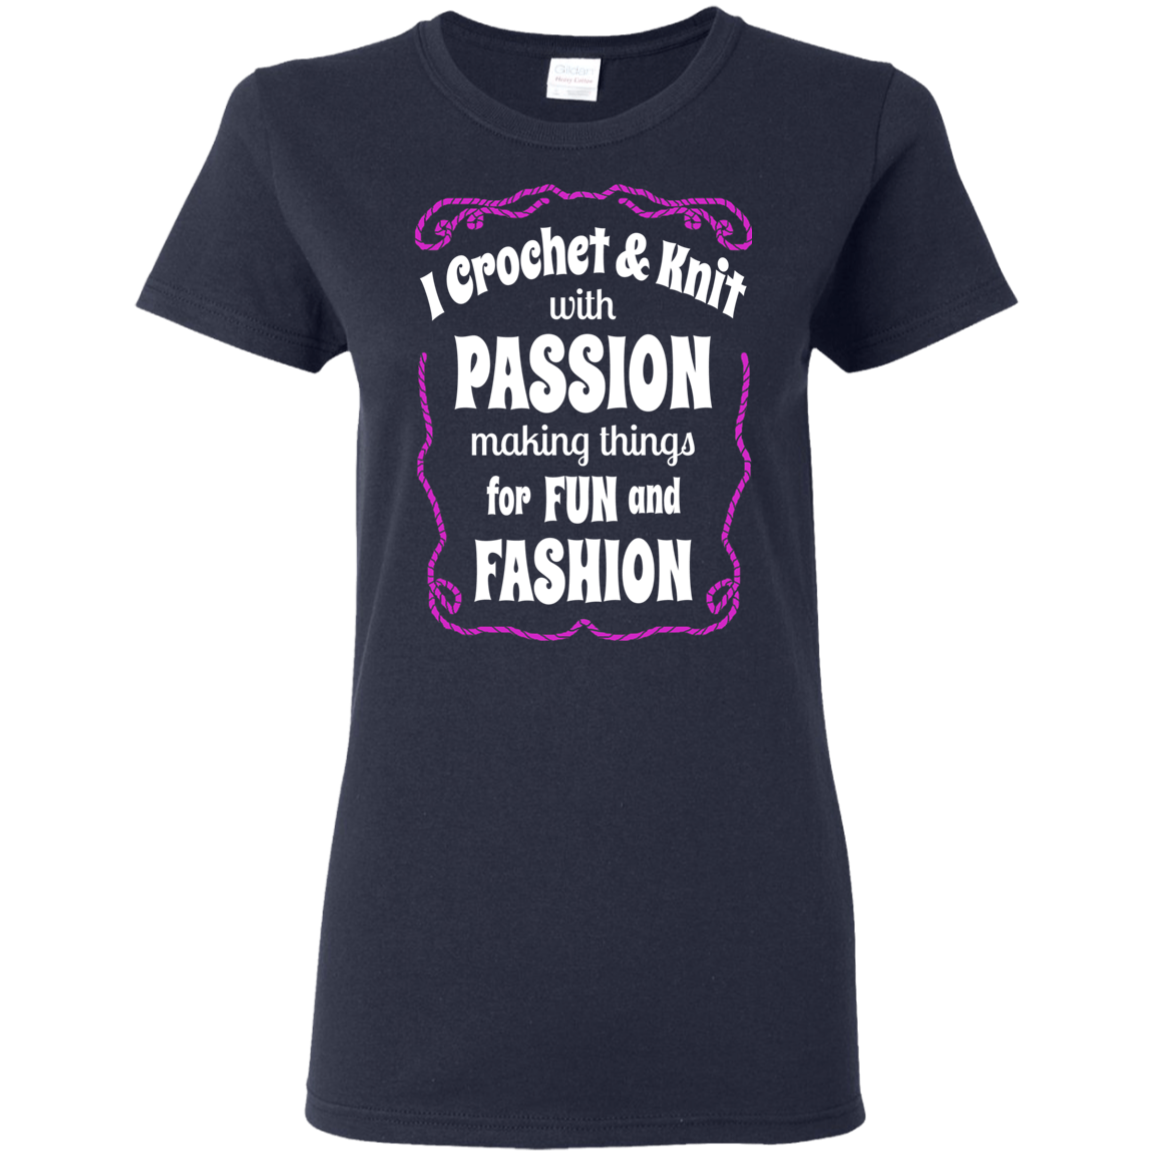 I Crochet & Knit with Passion Ladies Cotton T-Shirt